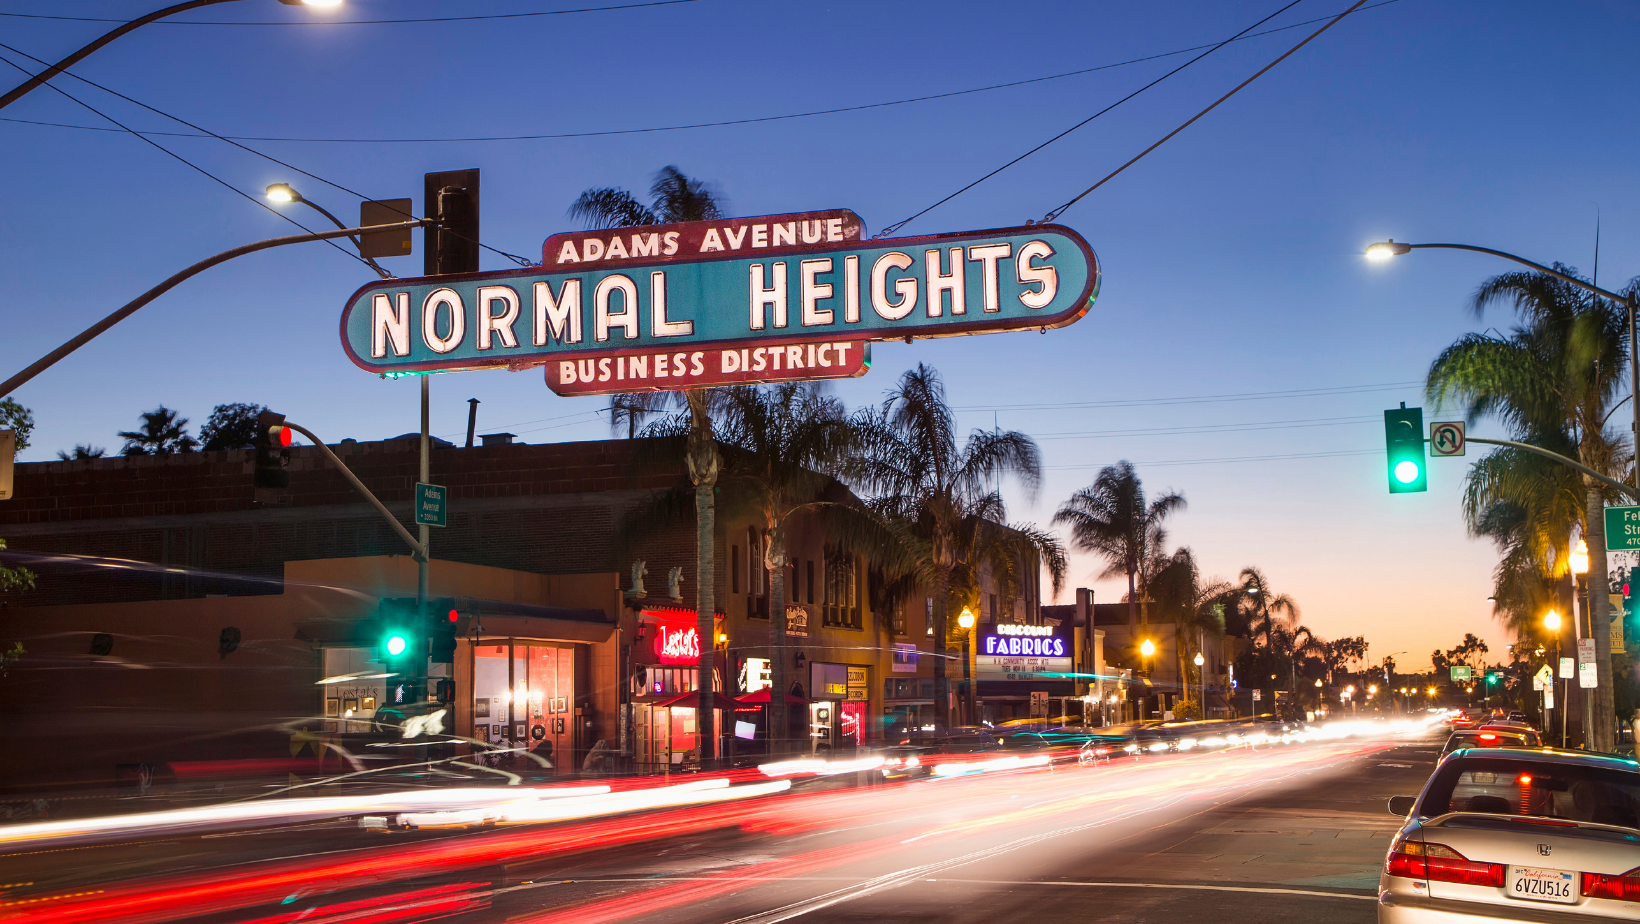 normal heights sign over the street